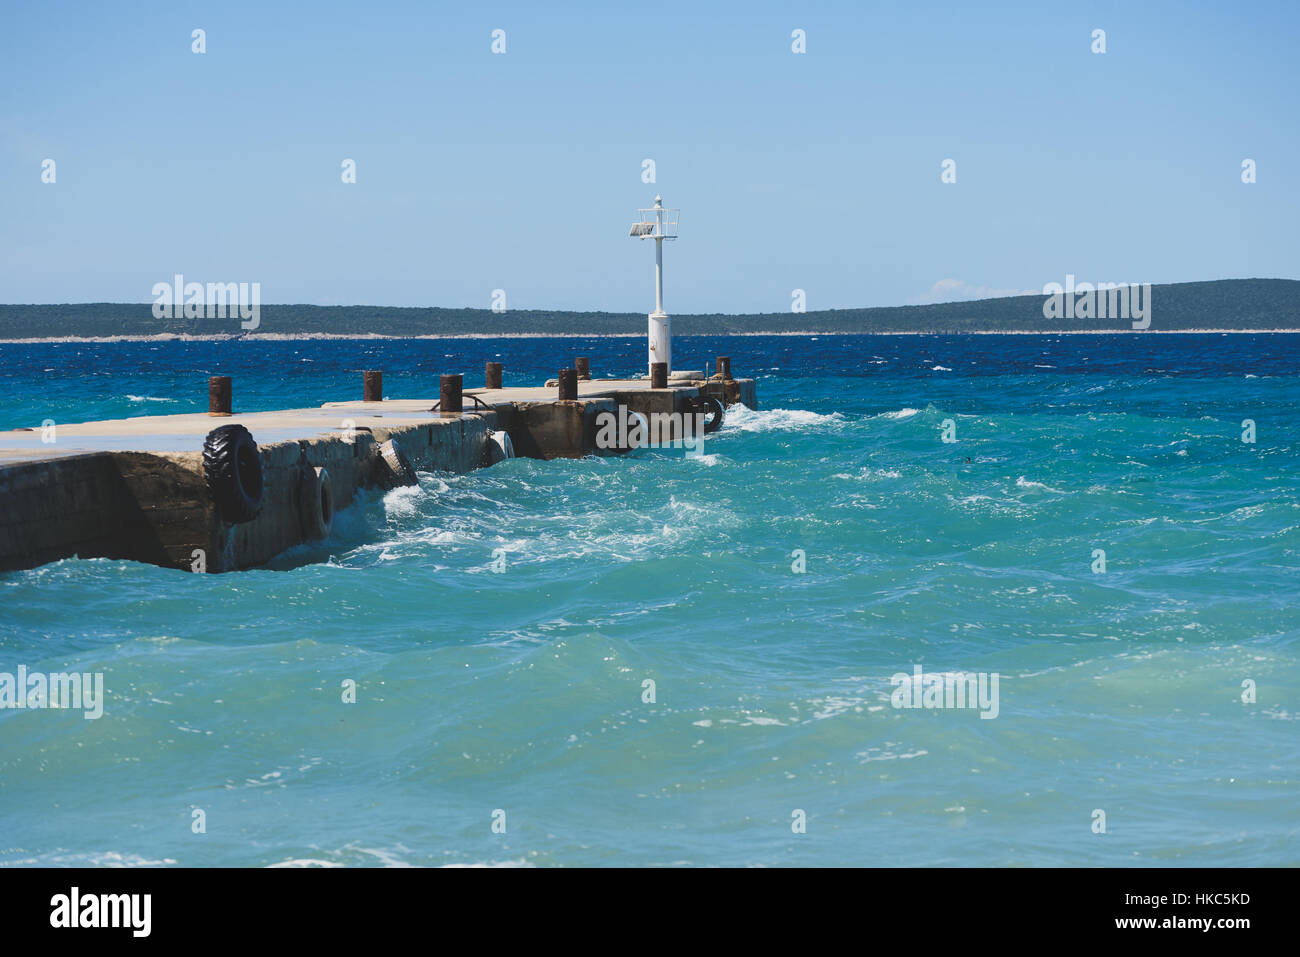 Strong winds and waves are hitting a pier in harbor. Port in Silba Croatia is experiencing bad windy weather. Stock Photo